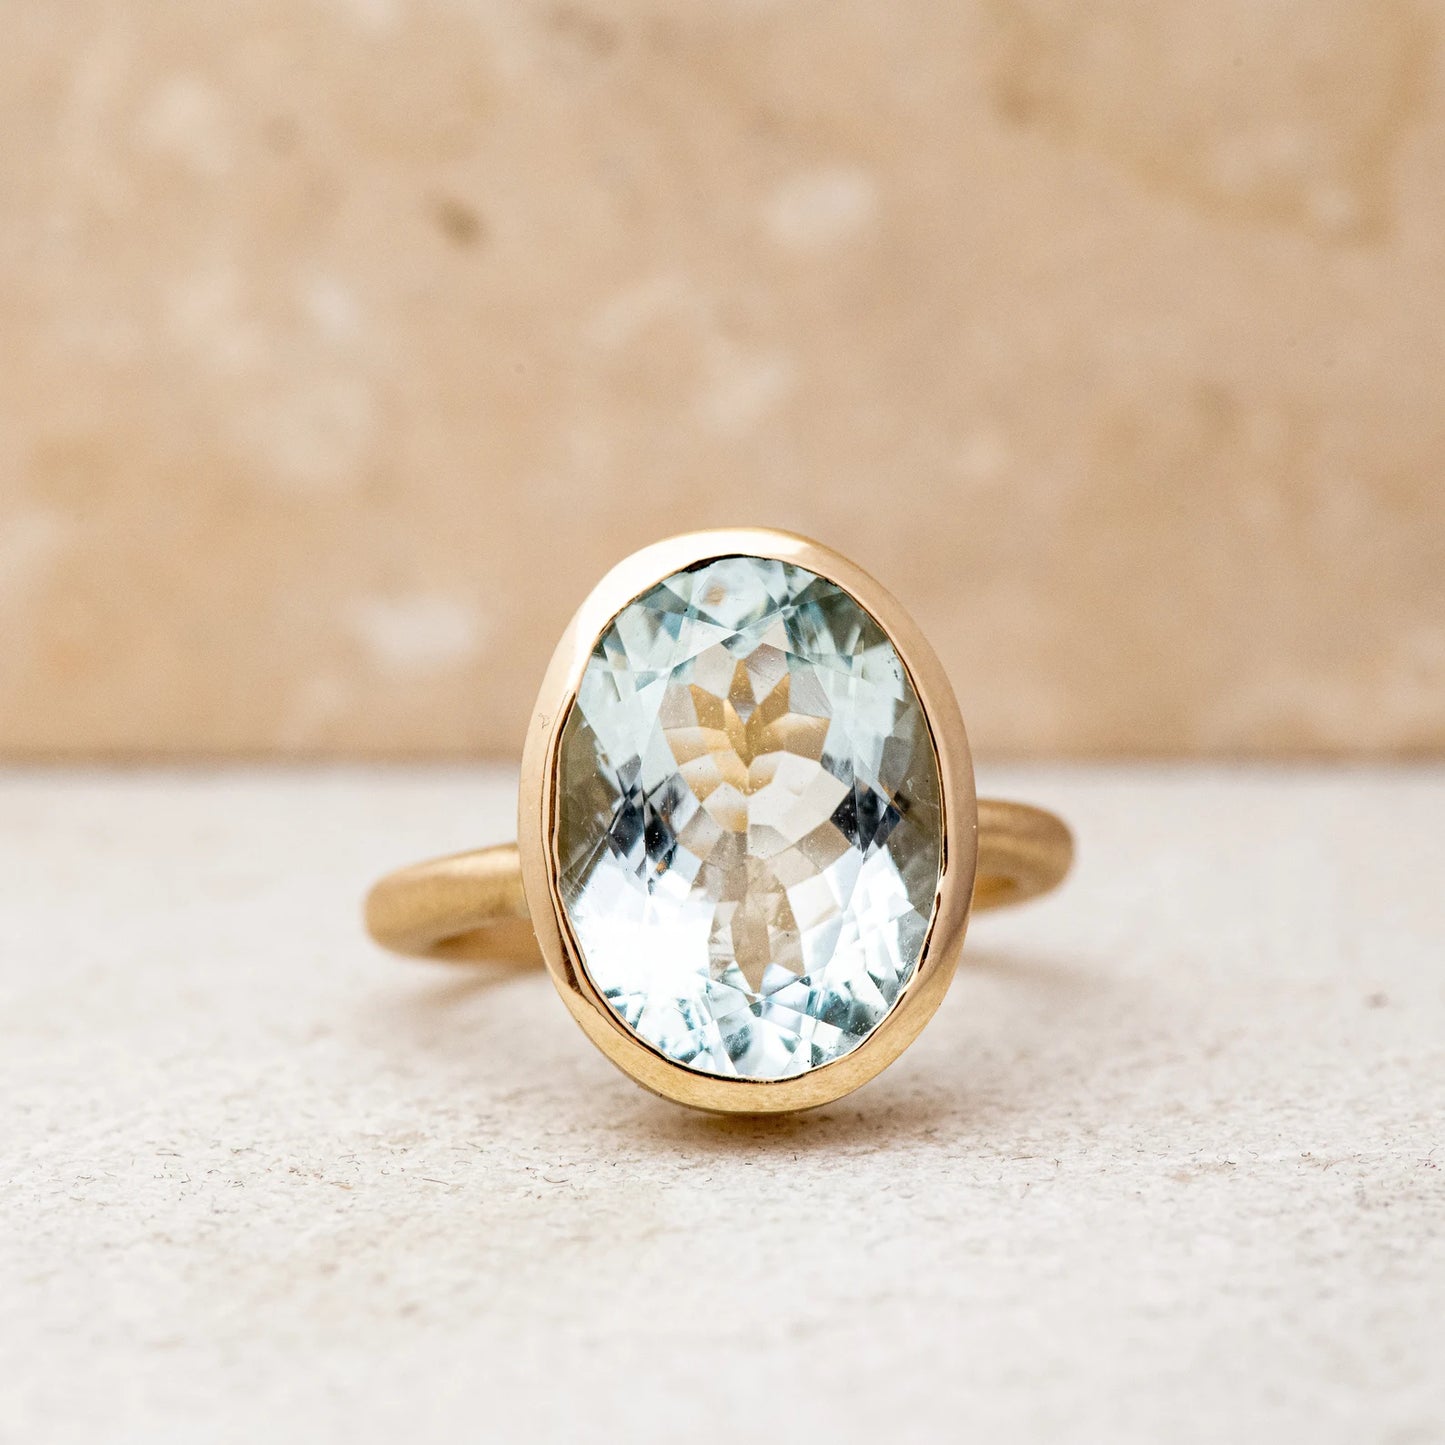 A handmade cassin jewelry piece featuring a large oval aquamarine stone set in yellow gold.